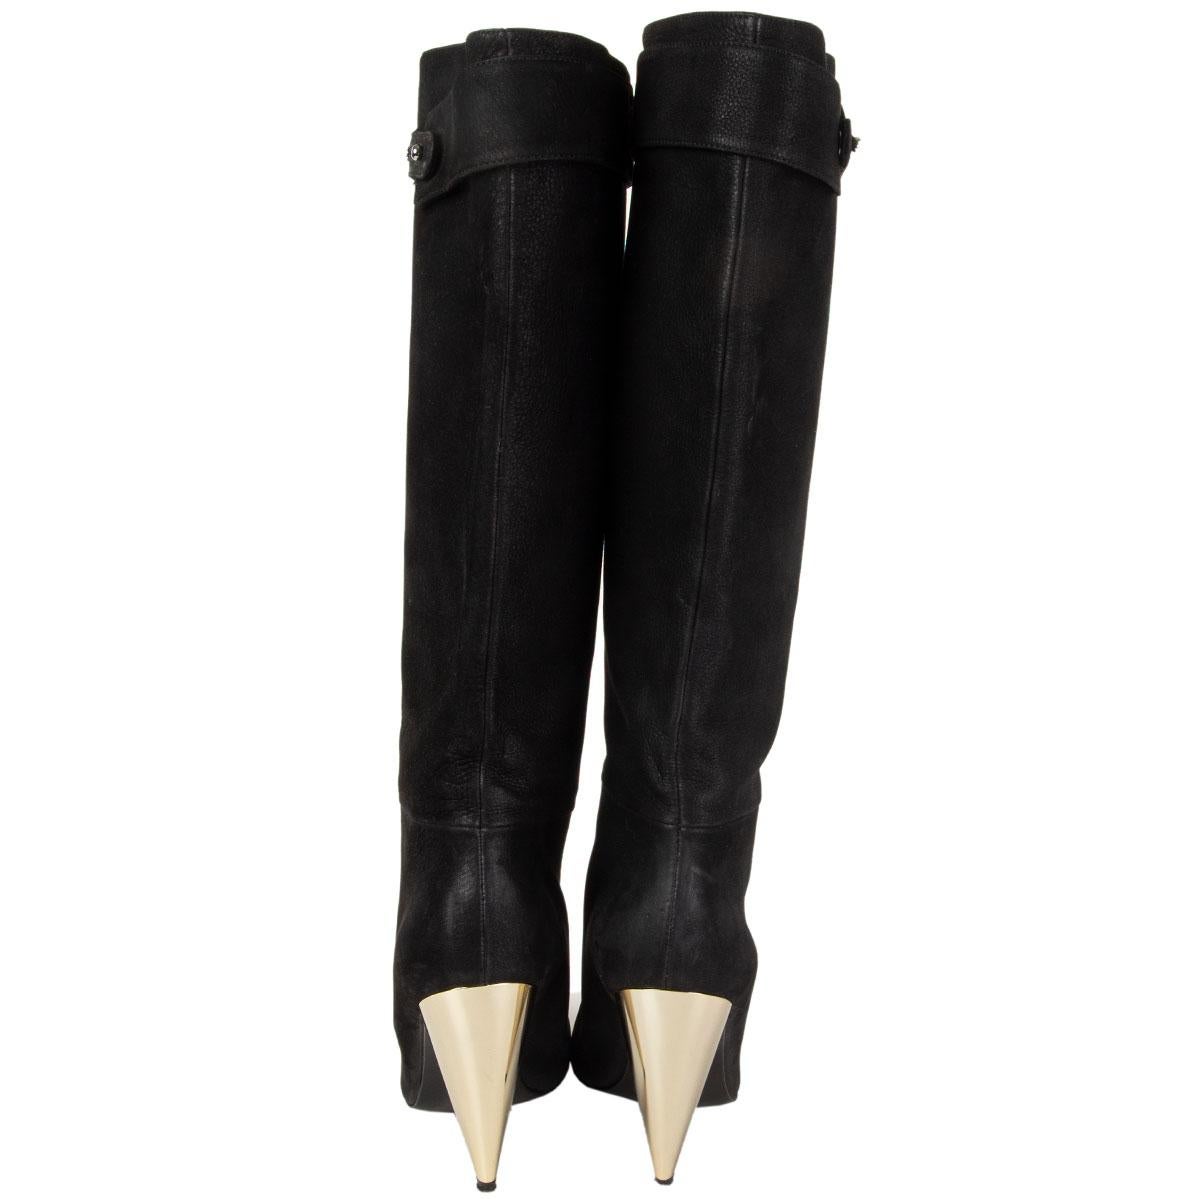 Black LANVIN black suede METALL HEEL Knee High Boots Shoes 37 For Sale